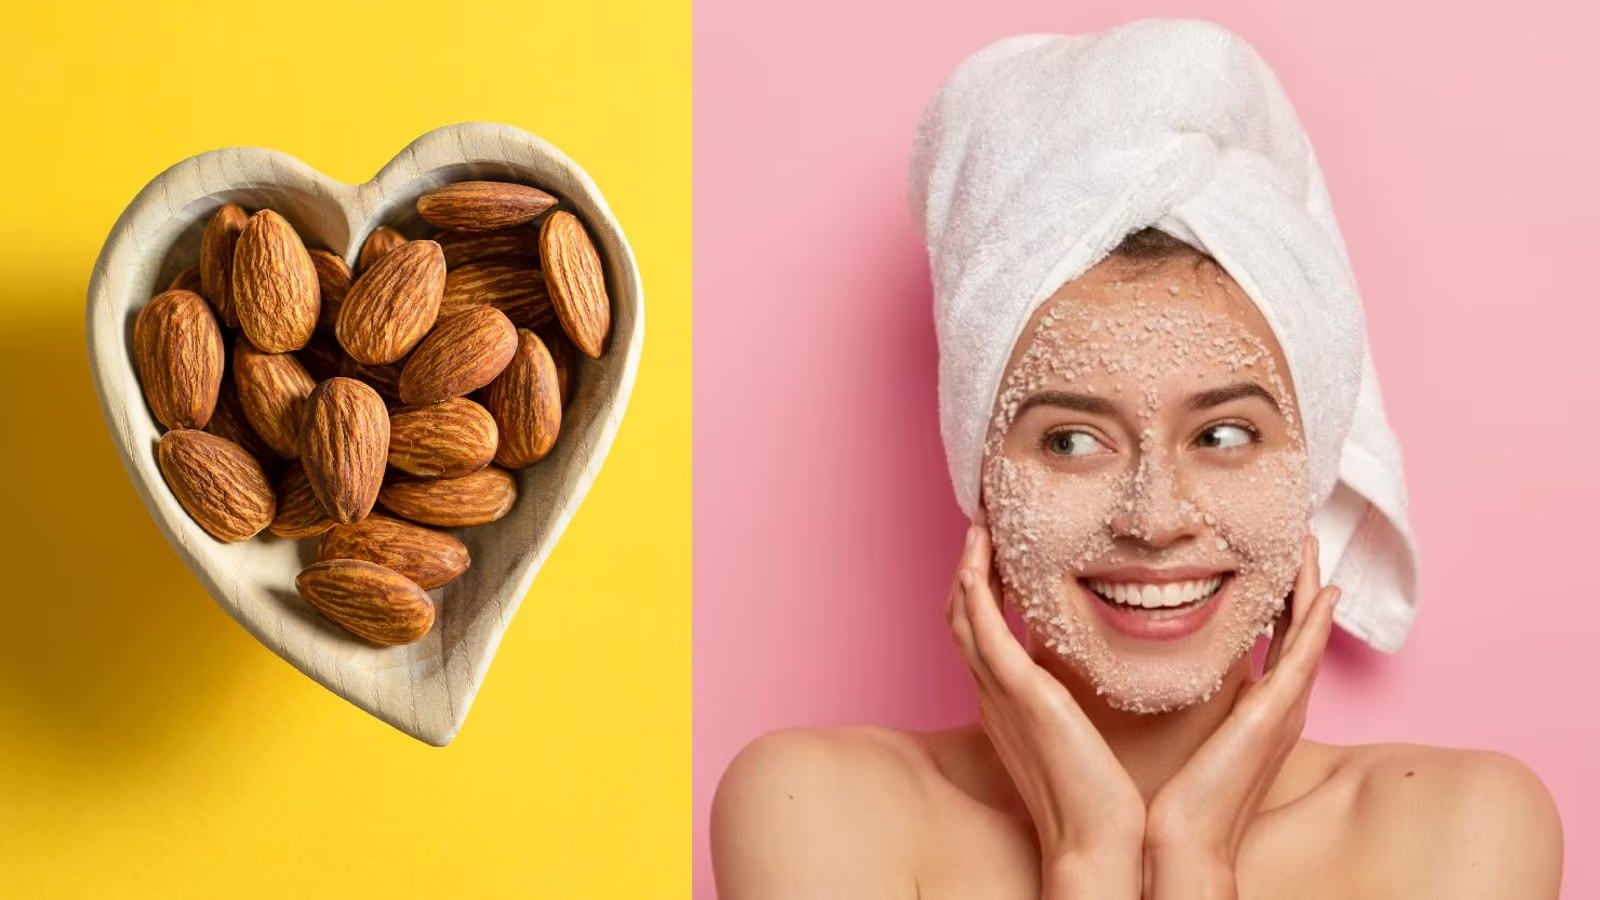 Almond milk helps you have white and healthy skin